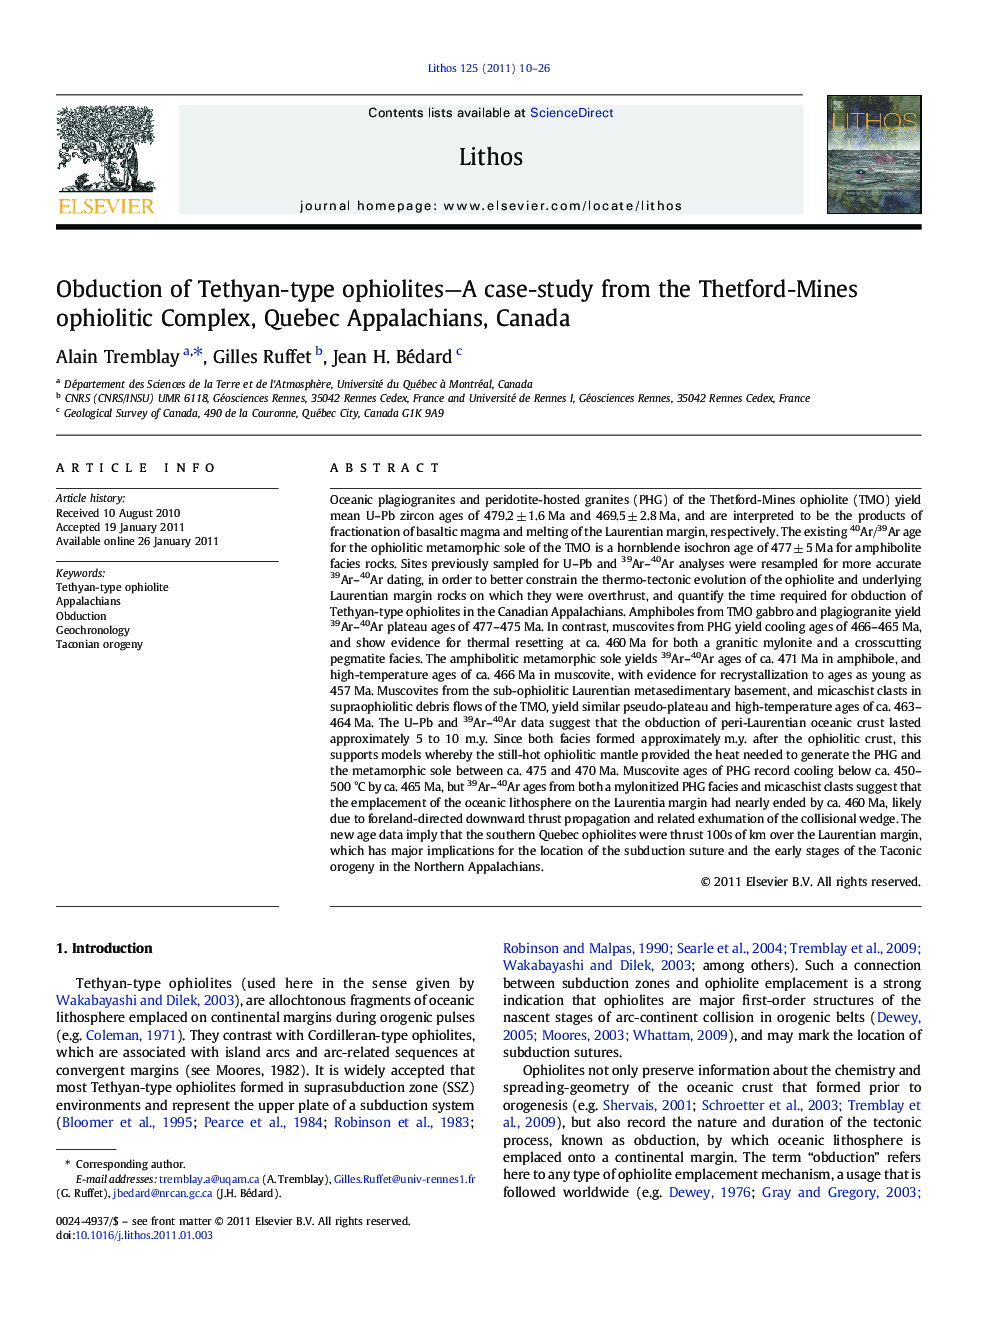 Obduction of Tethyan-type ophiolites-A case-study from the Thetford-Mines ophiolitic Complex, Quebec Appalachians, Canada